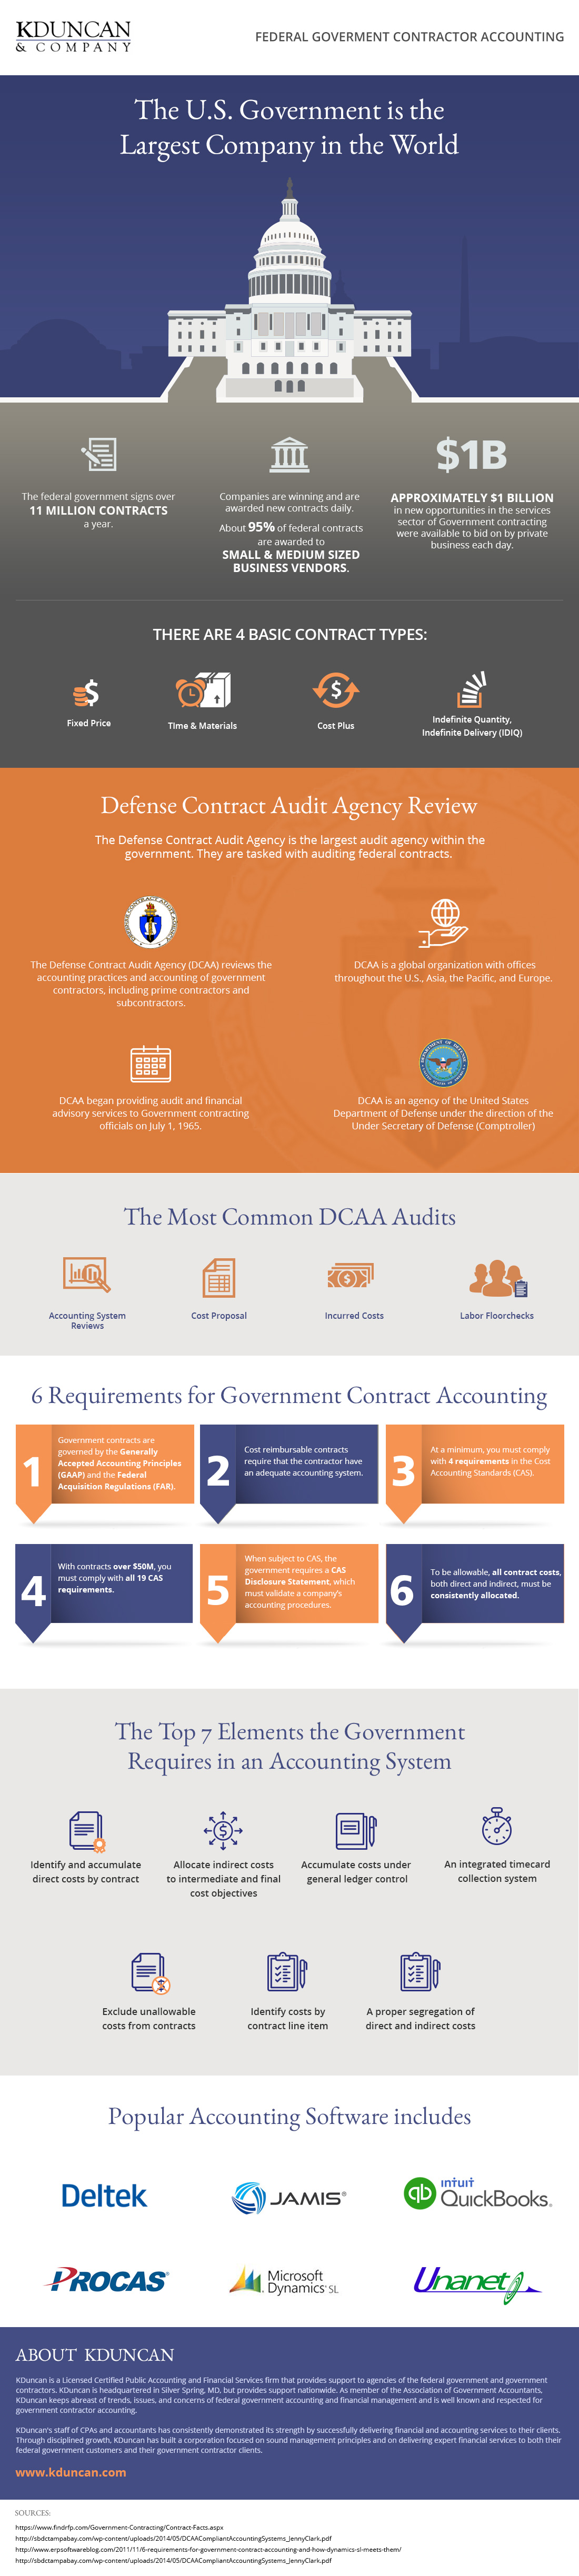 Federal Government Contractor Accounting